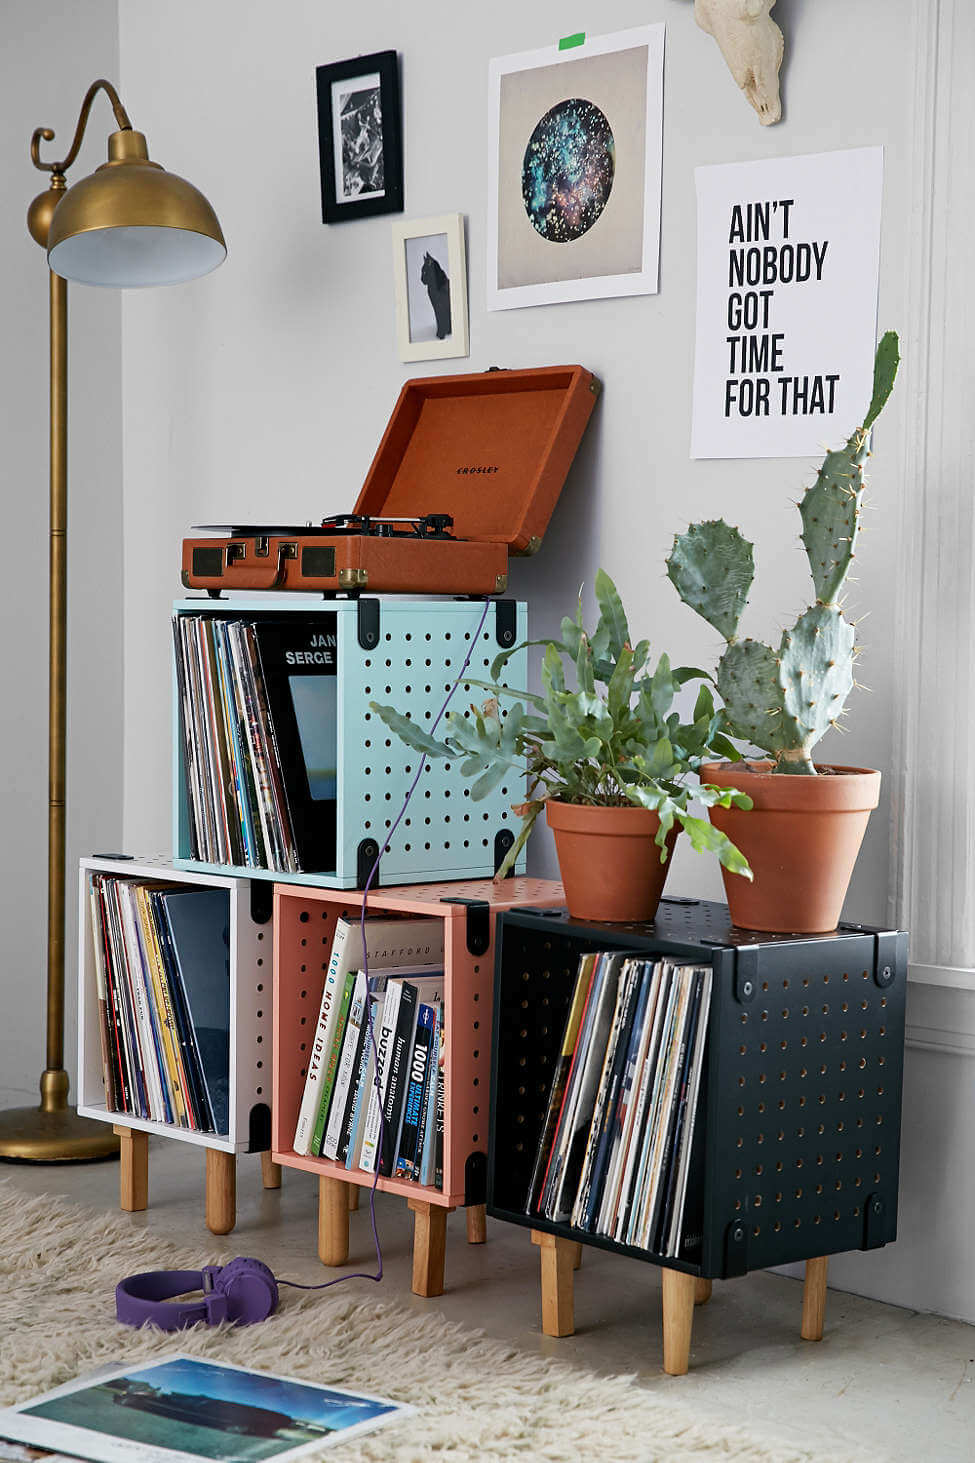 25 New Urban Outfitters Home Decor Products You Must See